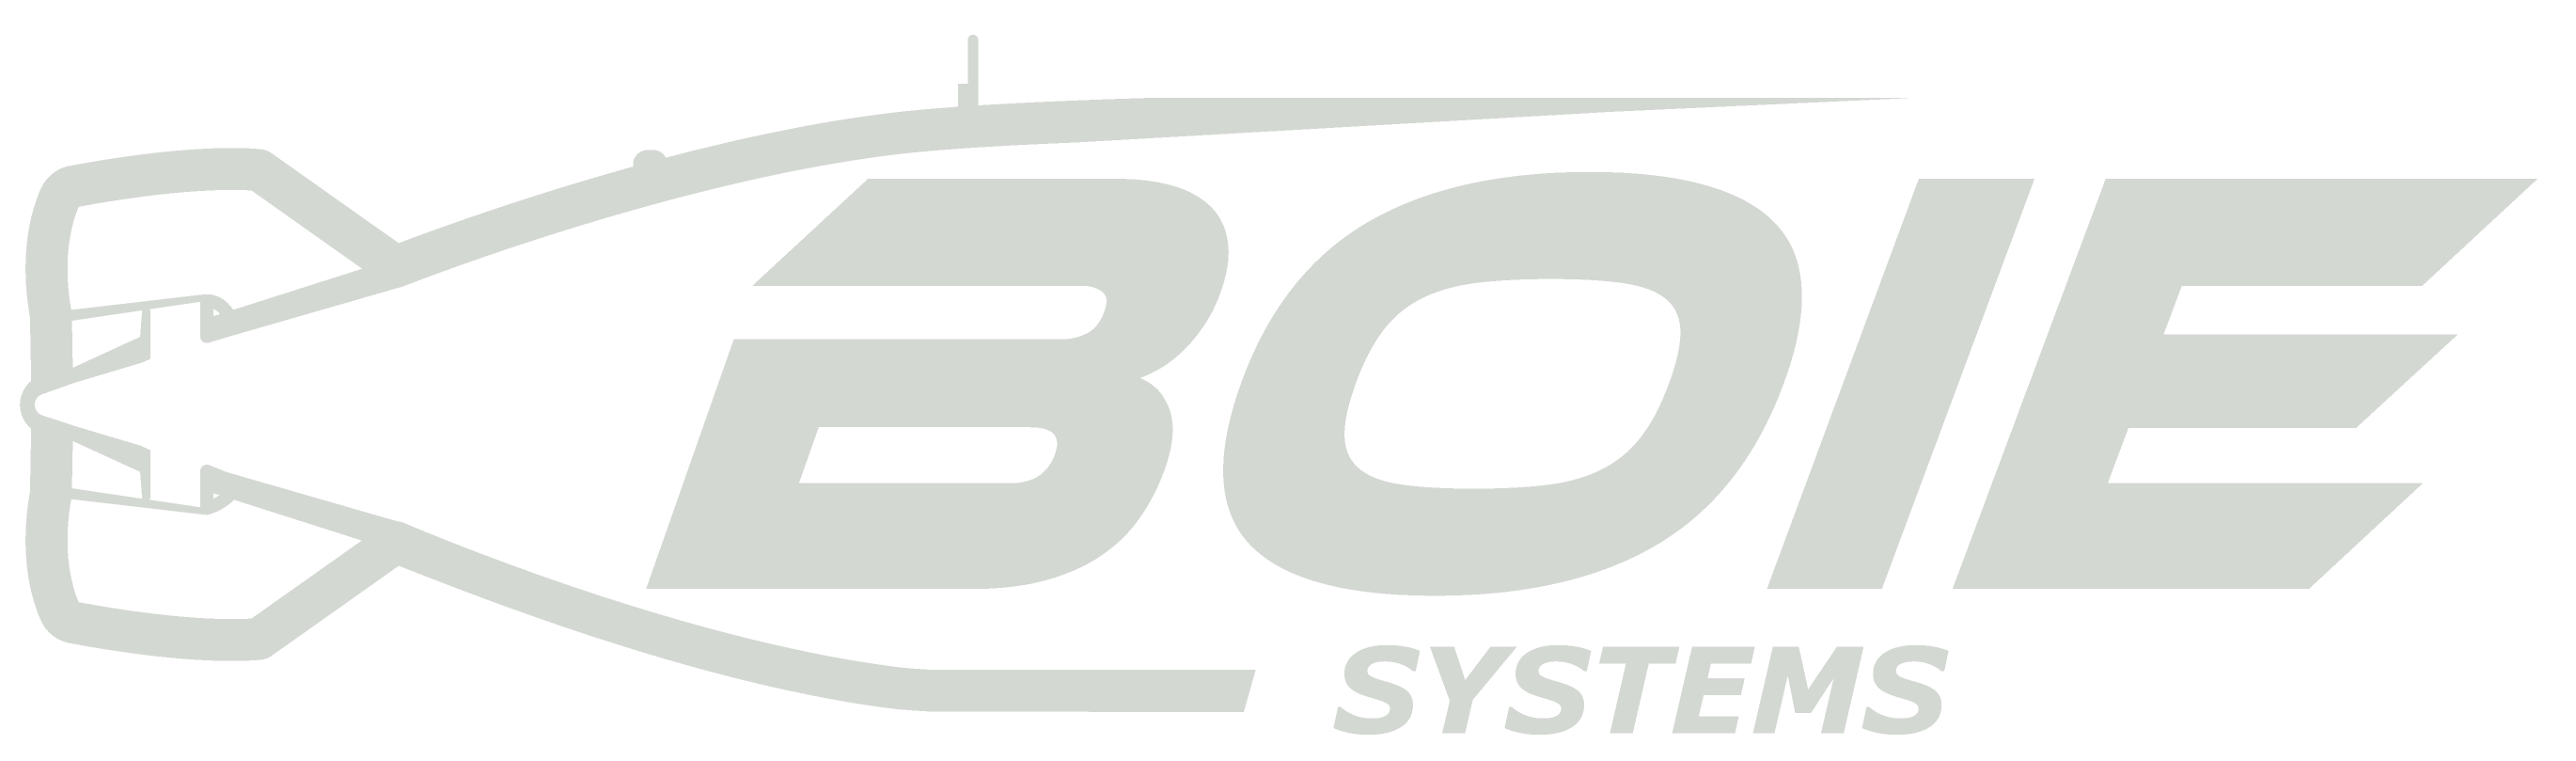 boie systems